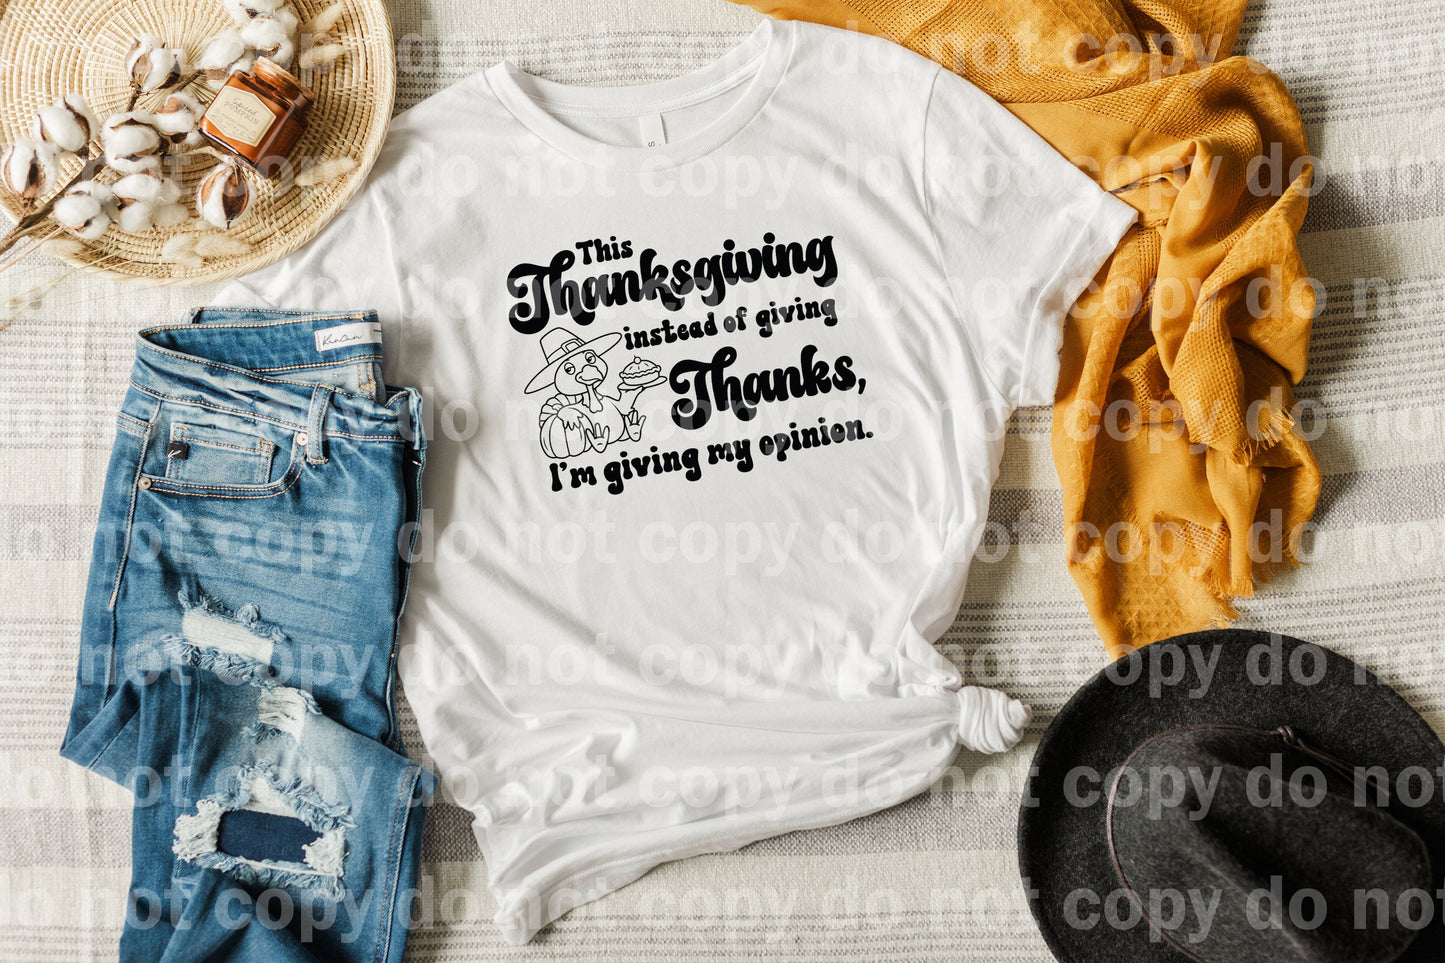 This Thanksgiving Instead Of Giving Thanks, I'm Giving My Opinion Full Color/One Color Dream Print or Sublimation Print